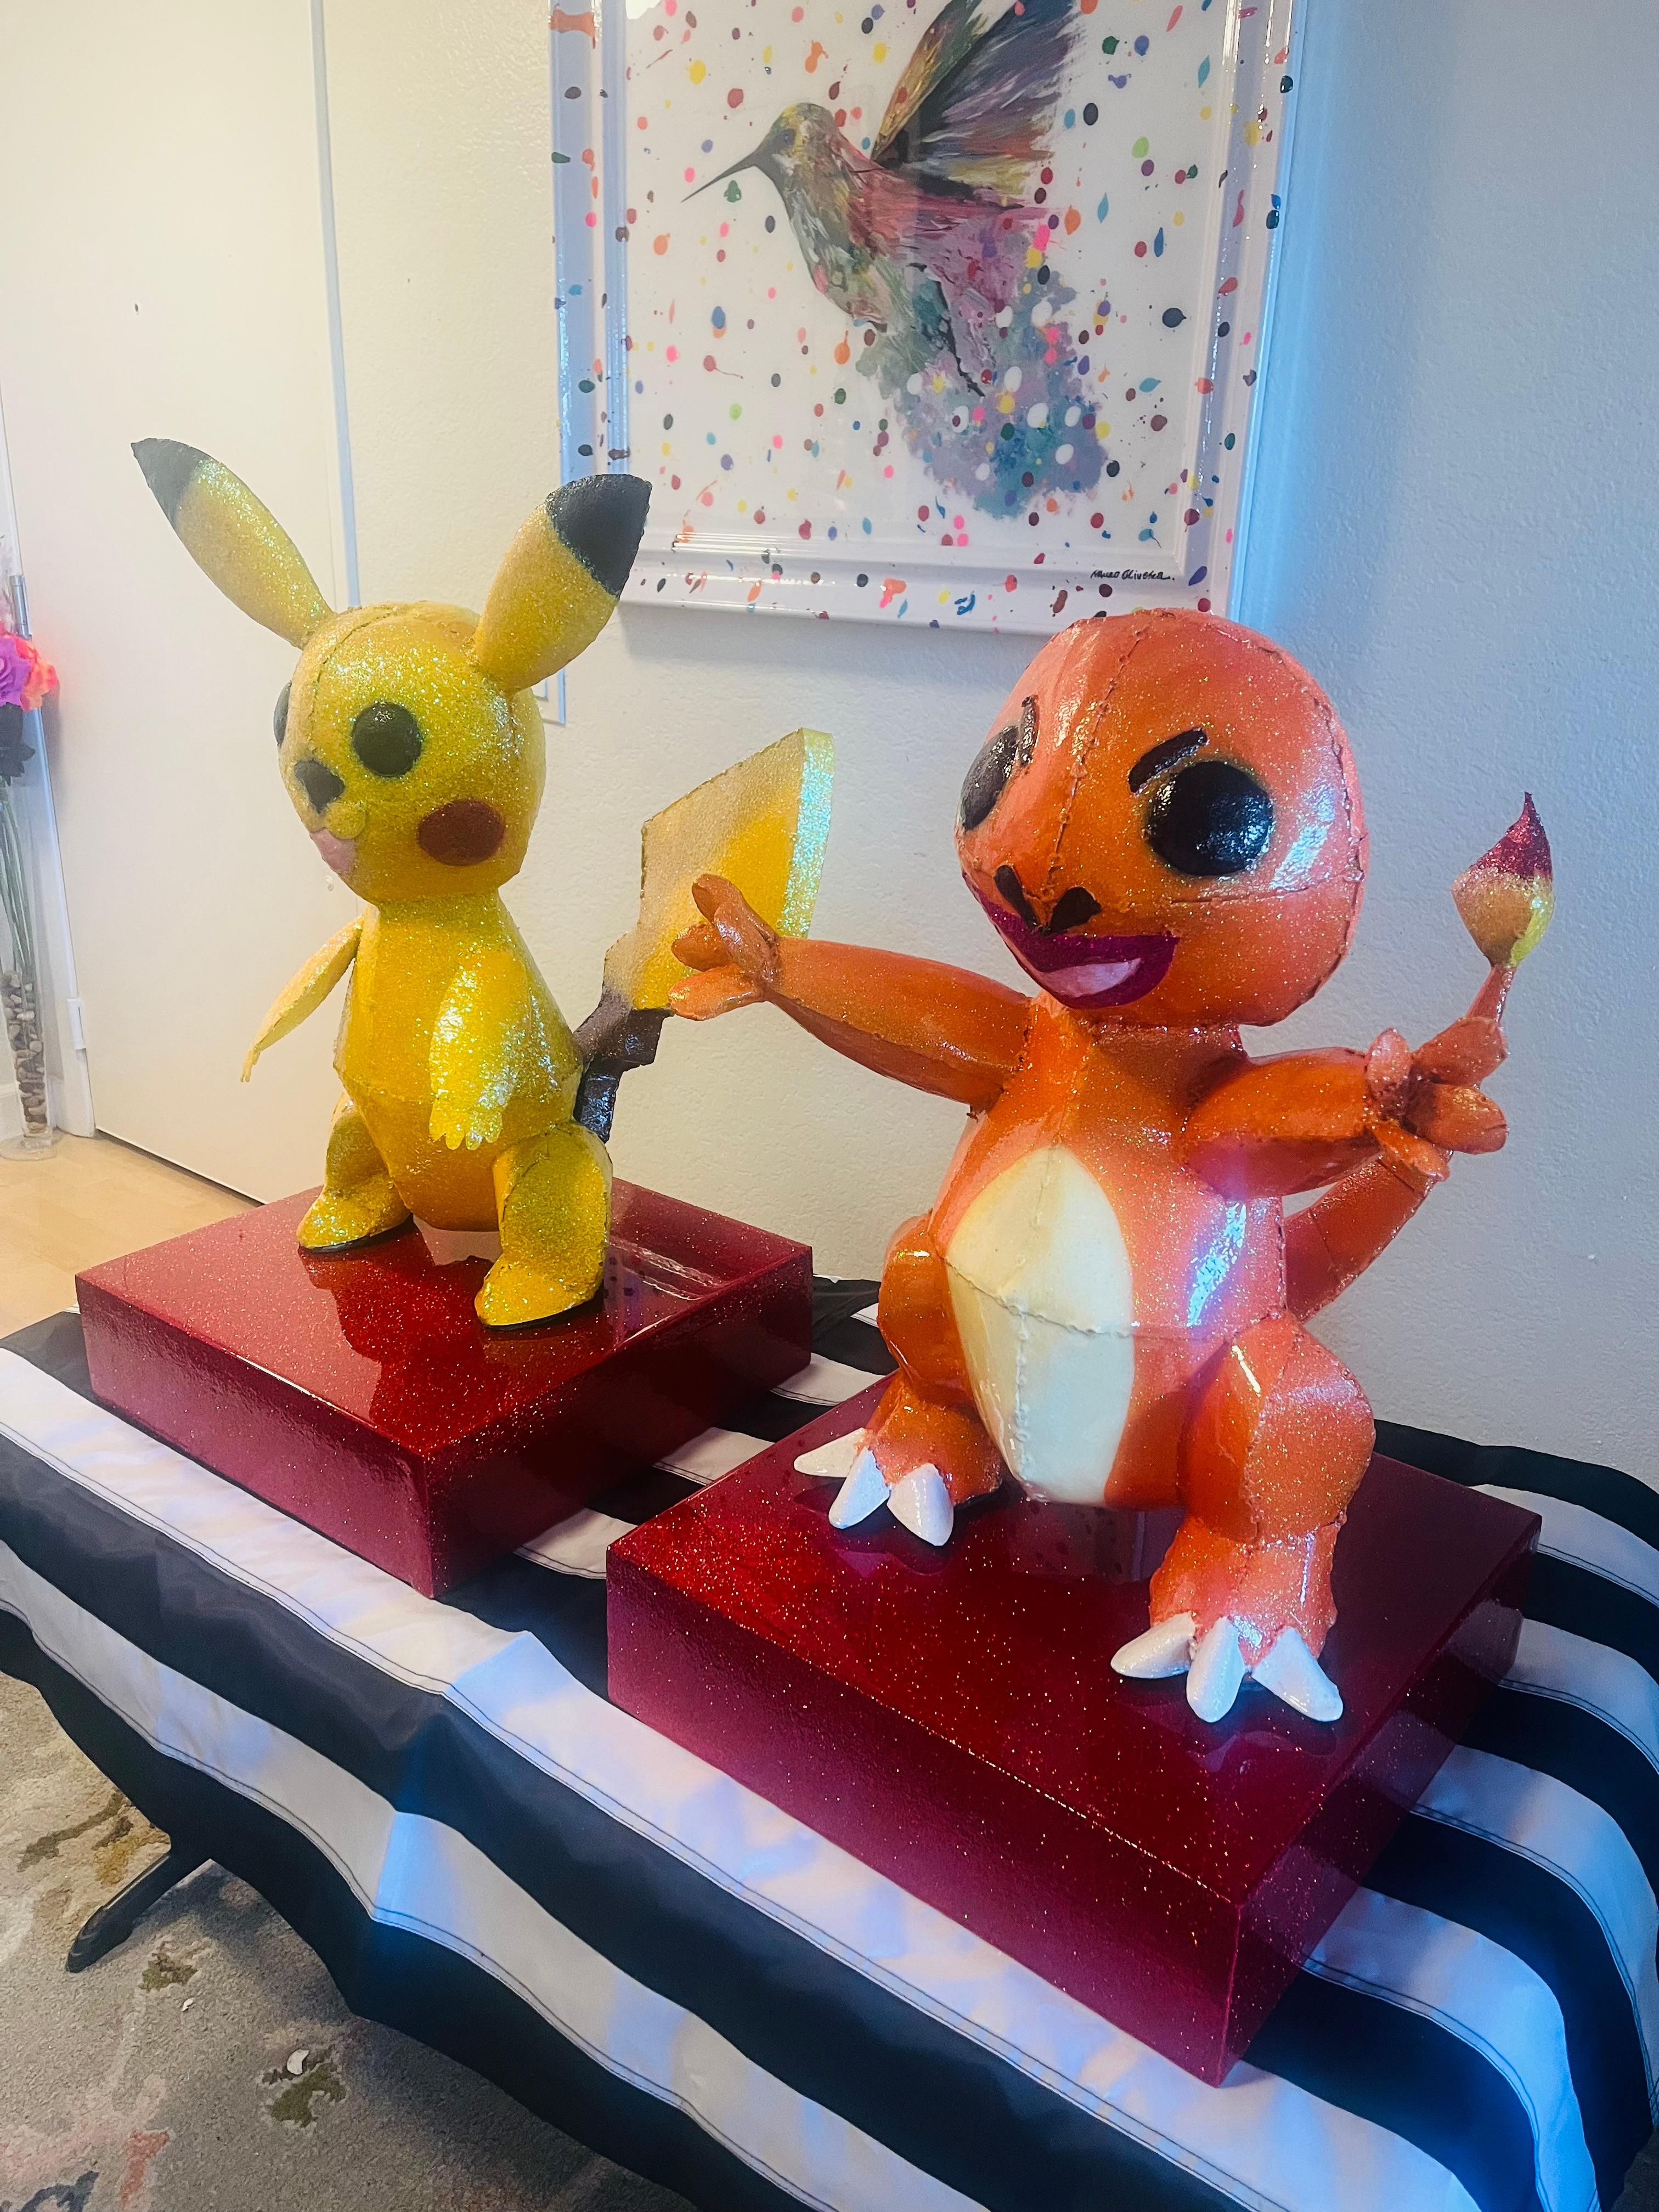               **ANNUAL SUPER SALE UNTIL JUNE 15TH ONLY**
*This Price Won't Be Repeated Again This Year - Take Advantage Of It*

These two Pokemon pieces are the savvy collector a must have: there is nothing like them on planet earth.

They were made